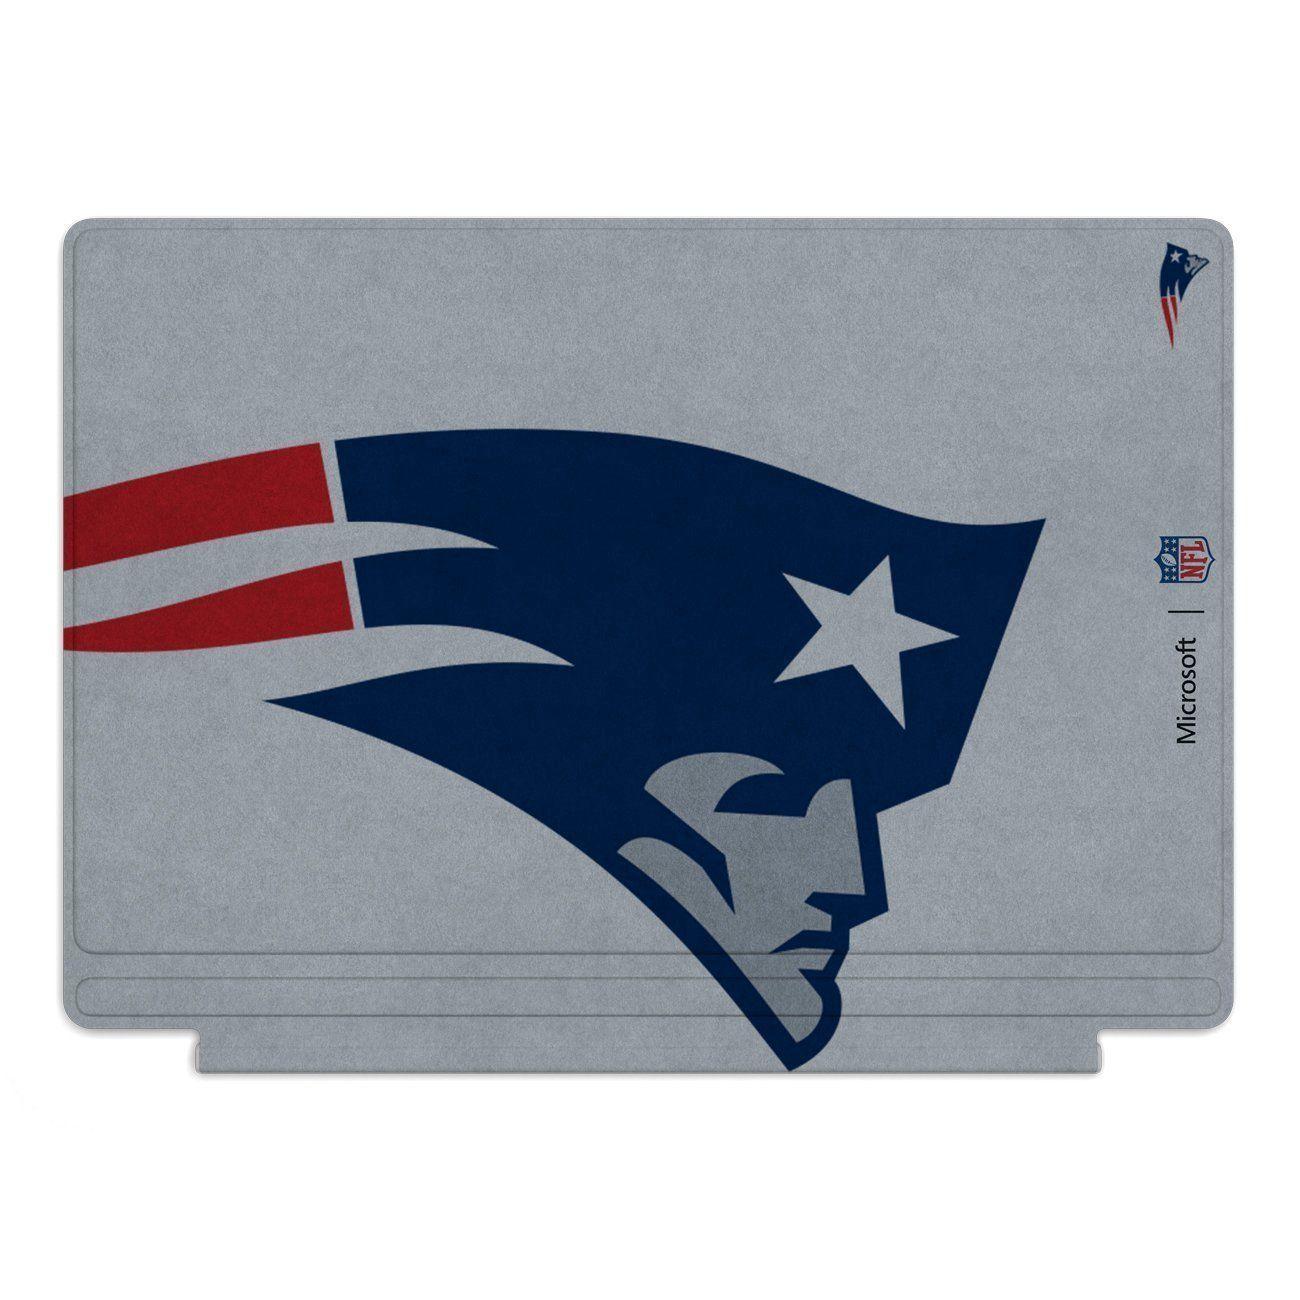 Surface Blue Logo - Microsoft Surface Pro 4 Special Edition NFL Type Cover